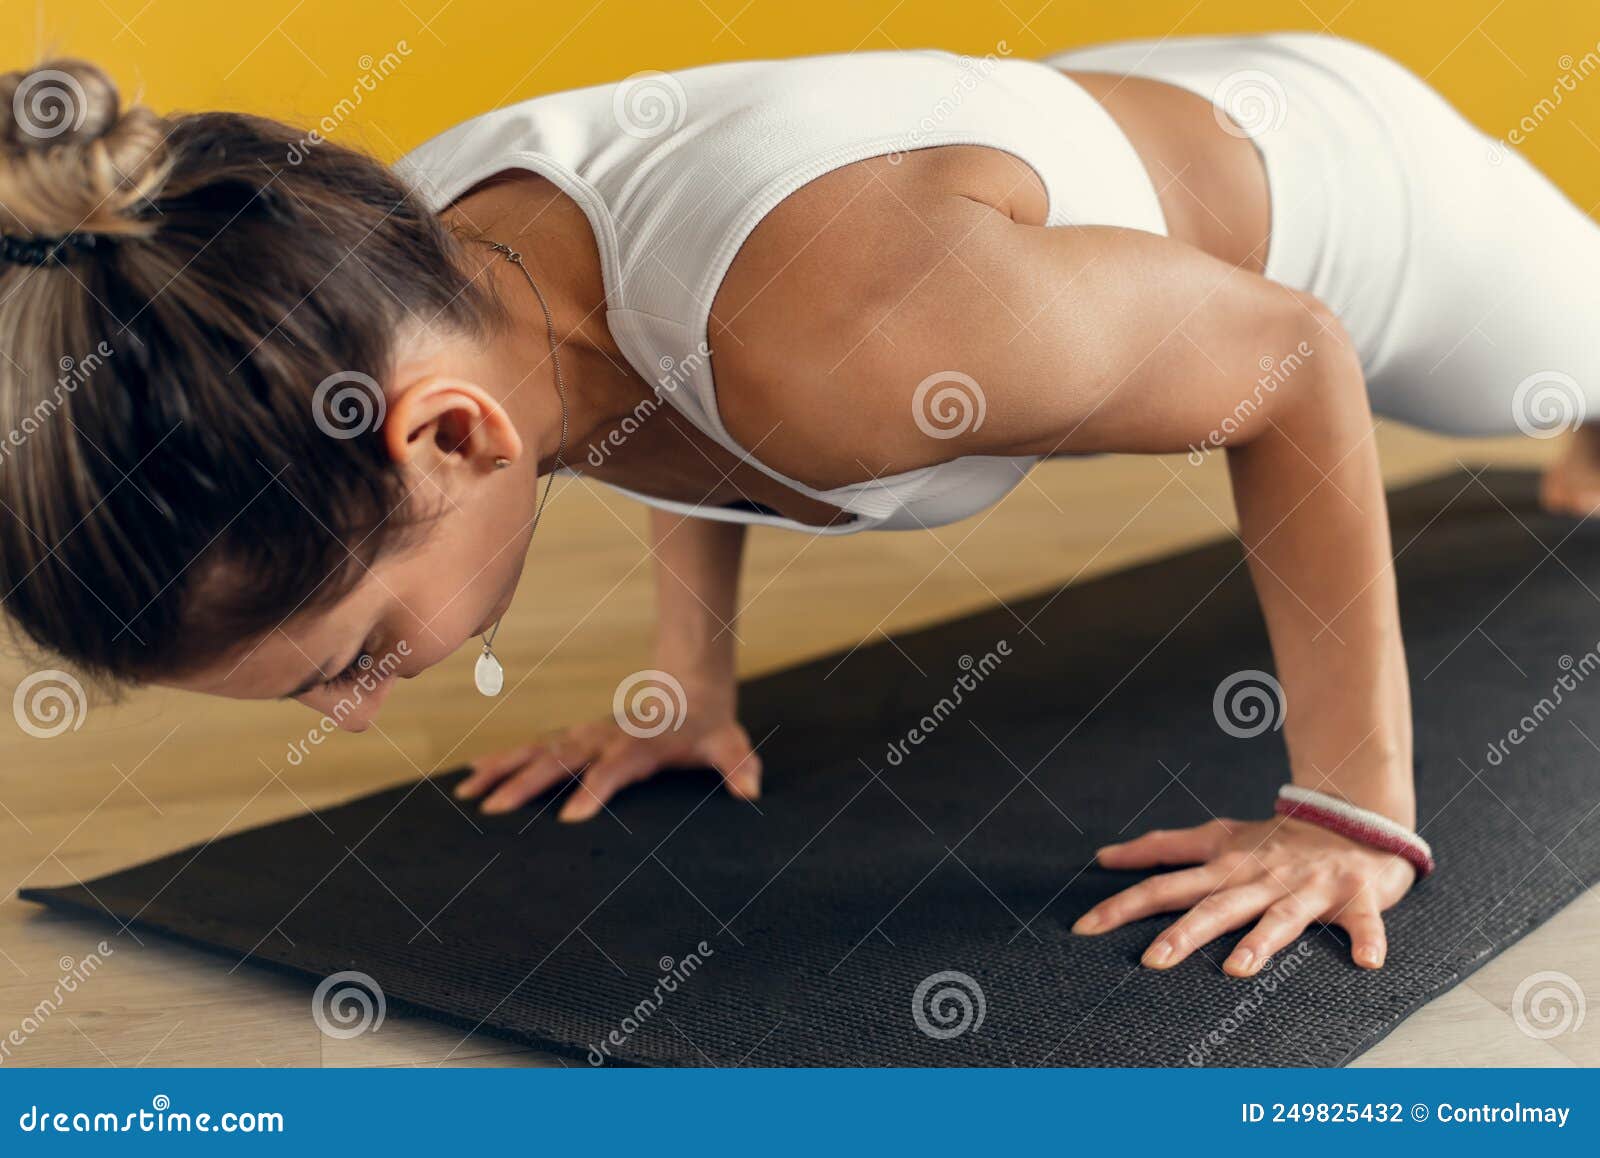 753 Chaturanga Poses Royalty-Free Photos and Stock Images | Shutterstock